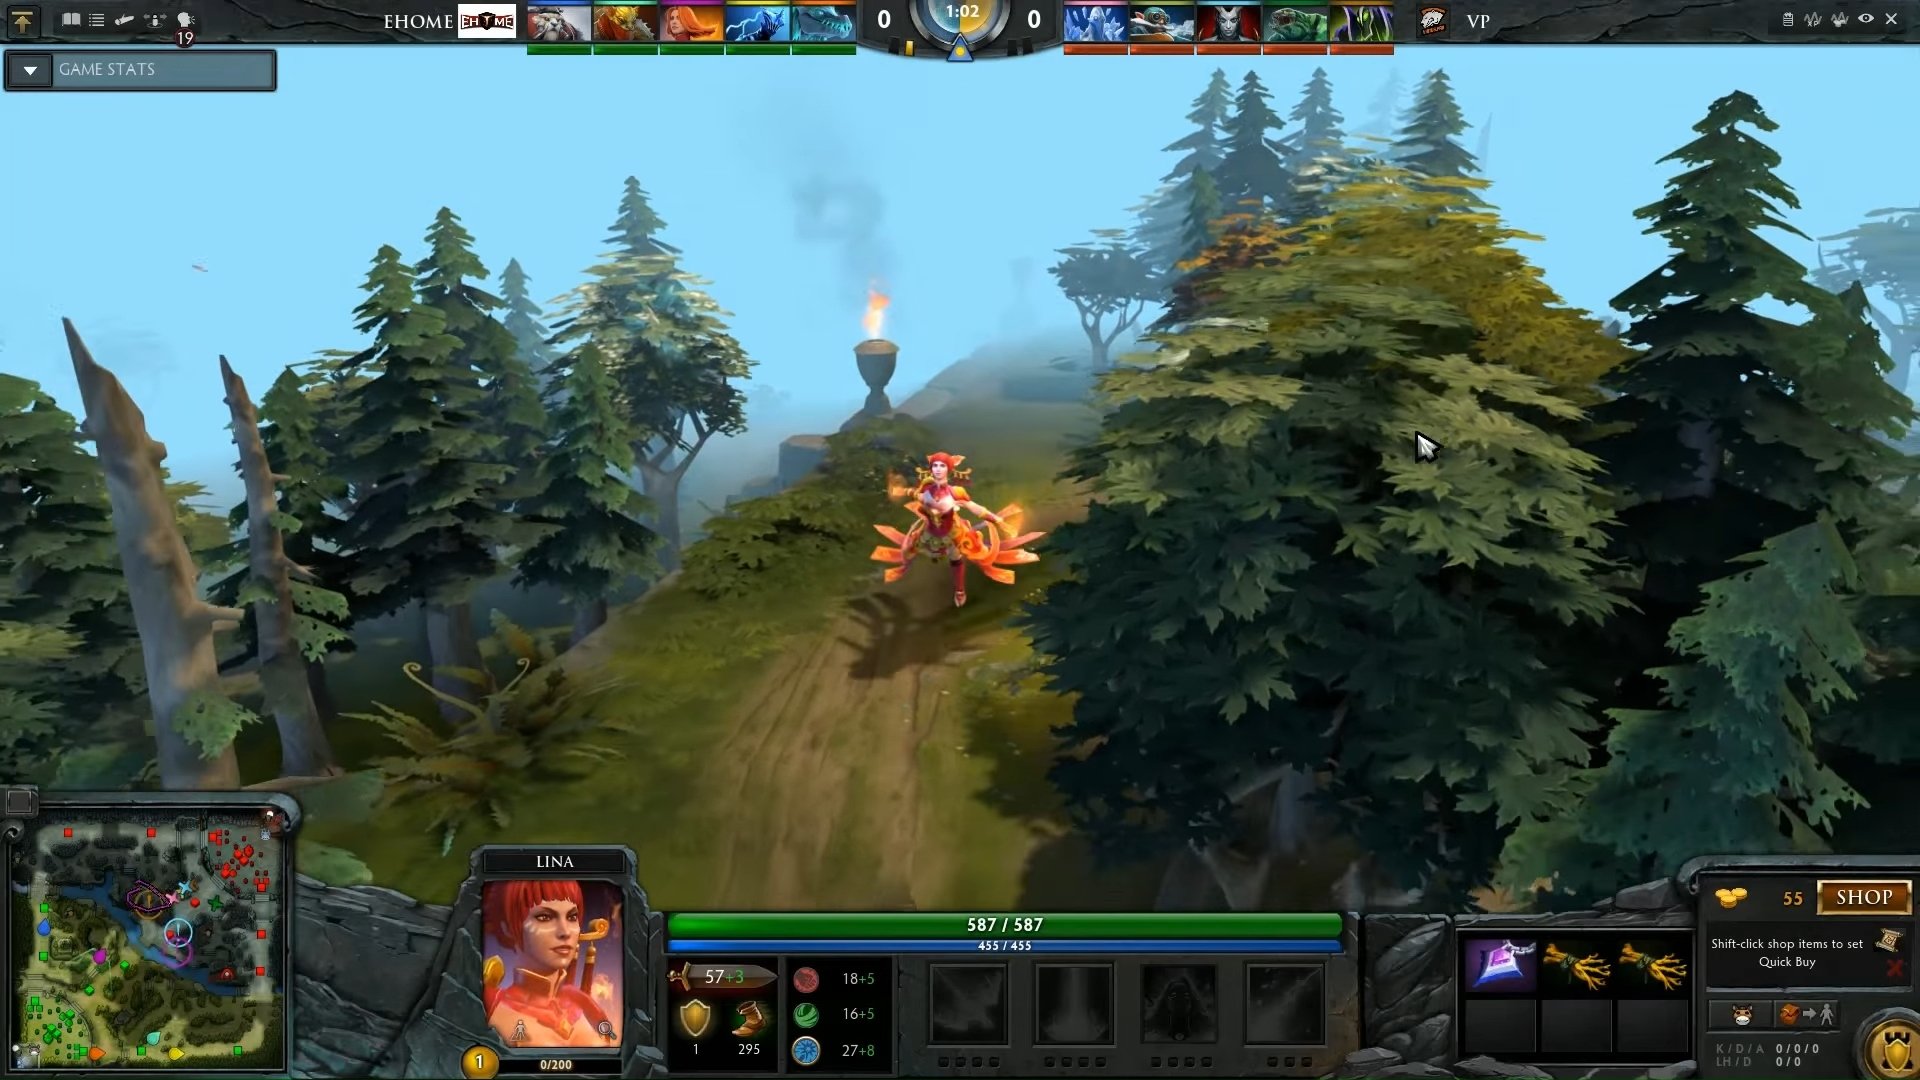 Best strategy games: a screenshot from Dota 2 shows the hero, Lina, walking through a forest.